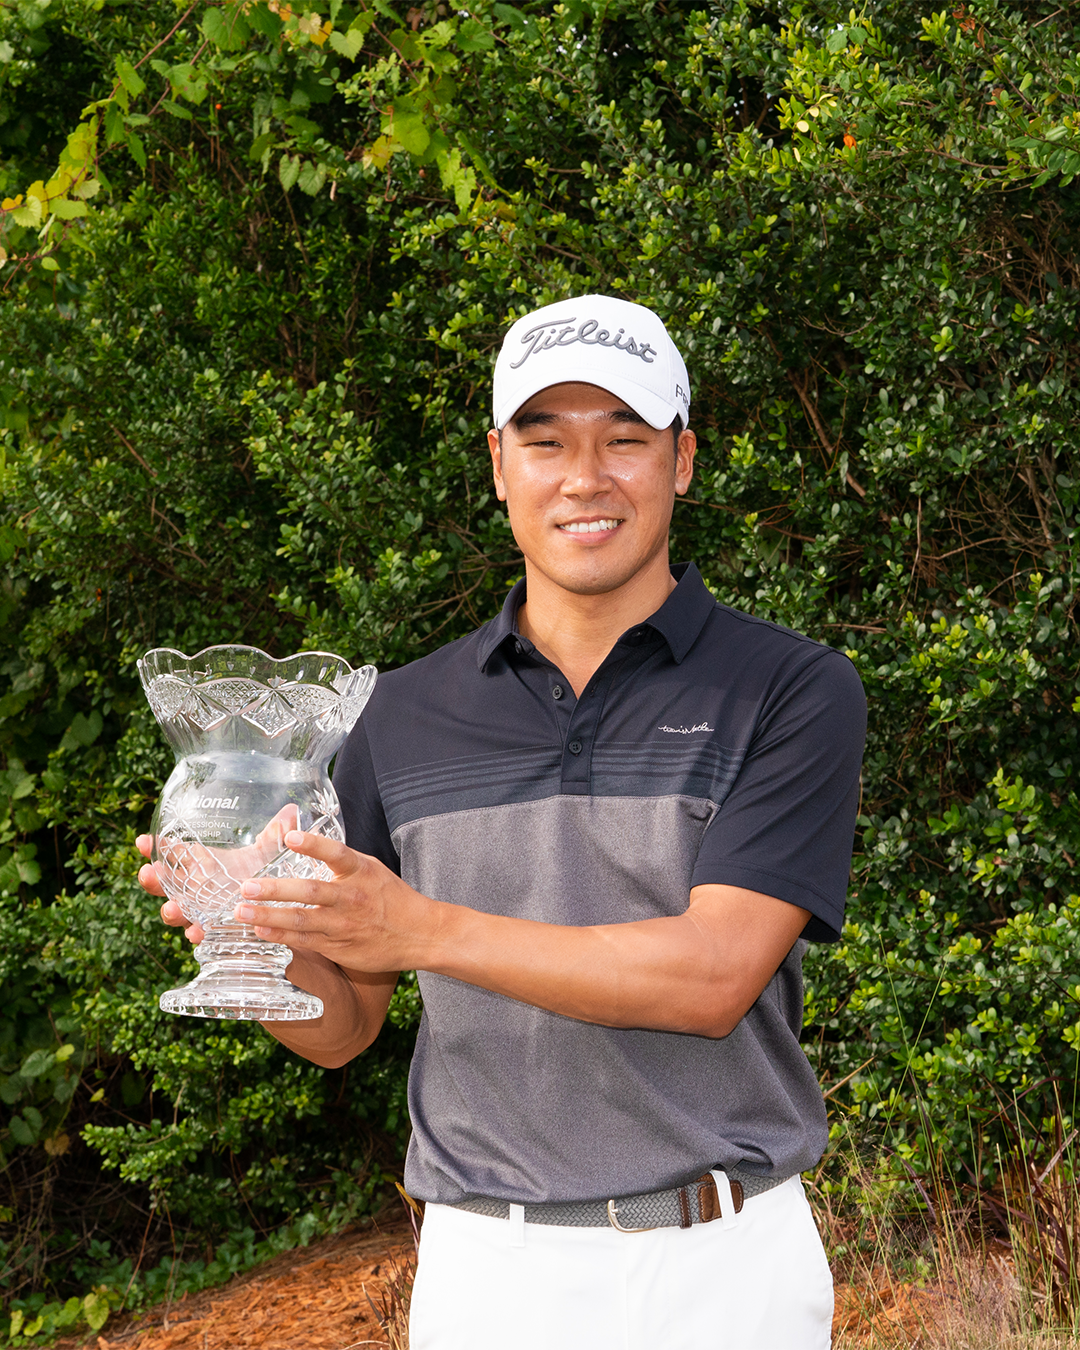 2021 Champion Jin Chung poses for a photo with the trophy after the final round of the 45th National Car Rental Assistant PGA Professional Championship held at the PGA Golf Club on November 14, 2021 in Port St. Lucie, Florida. (Photo by Hailey Garrett/PGA of America)